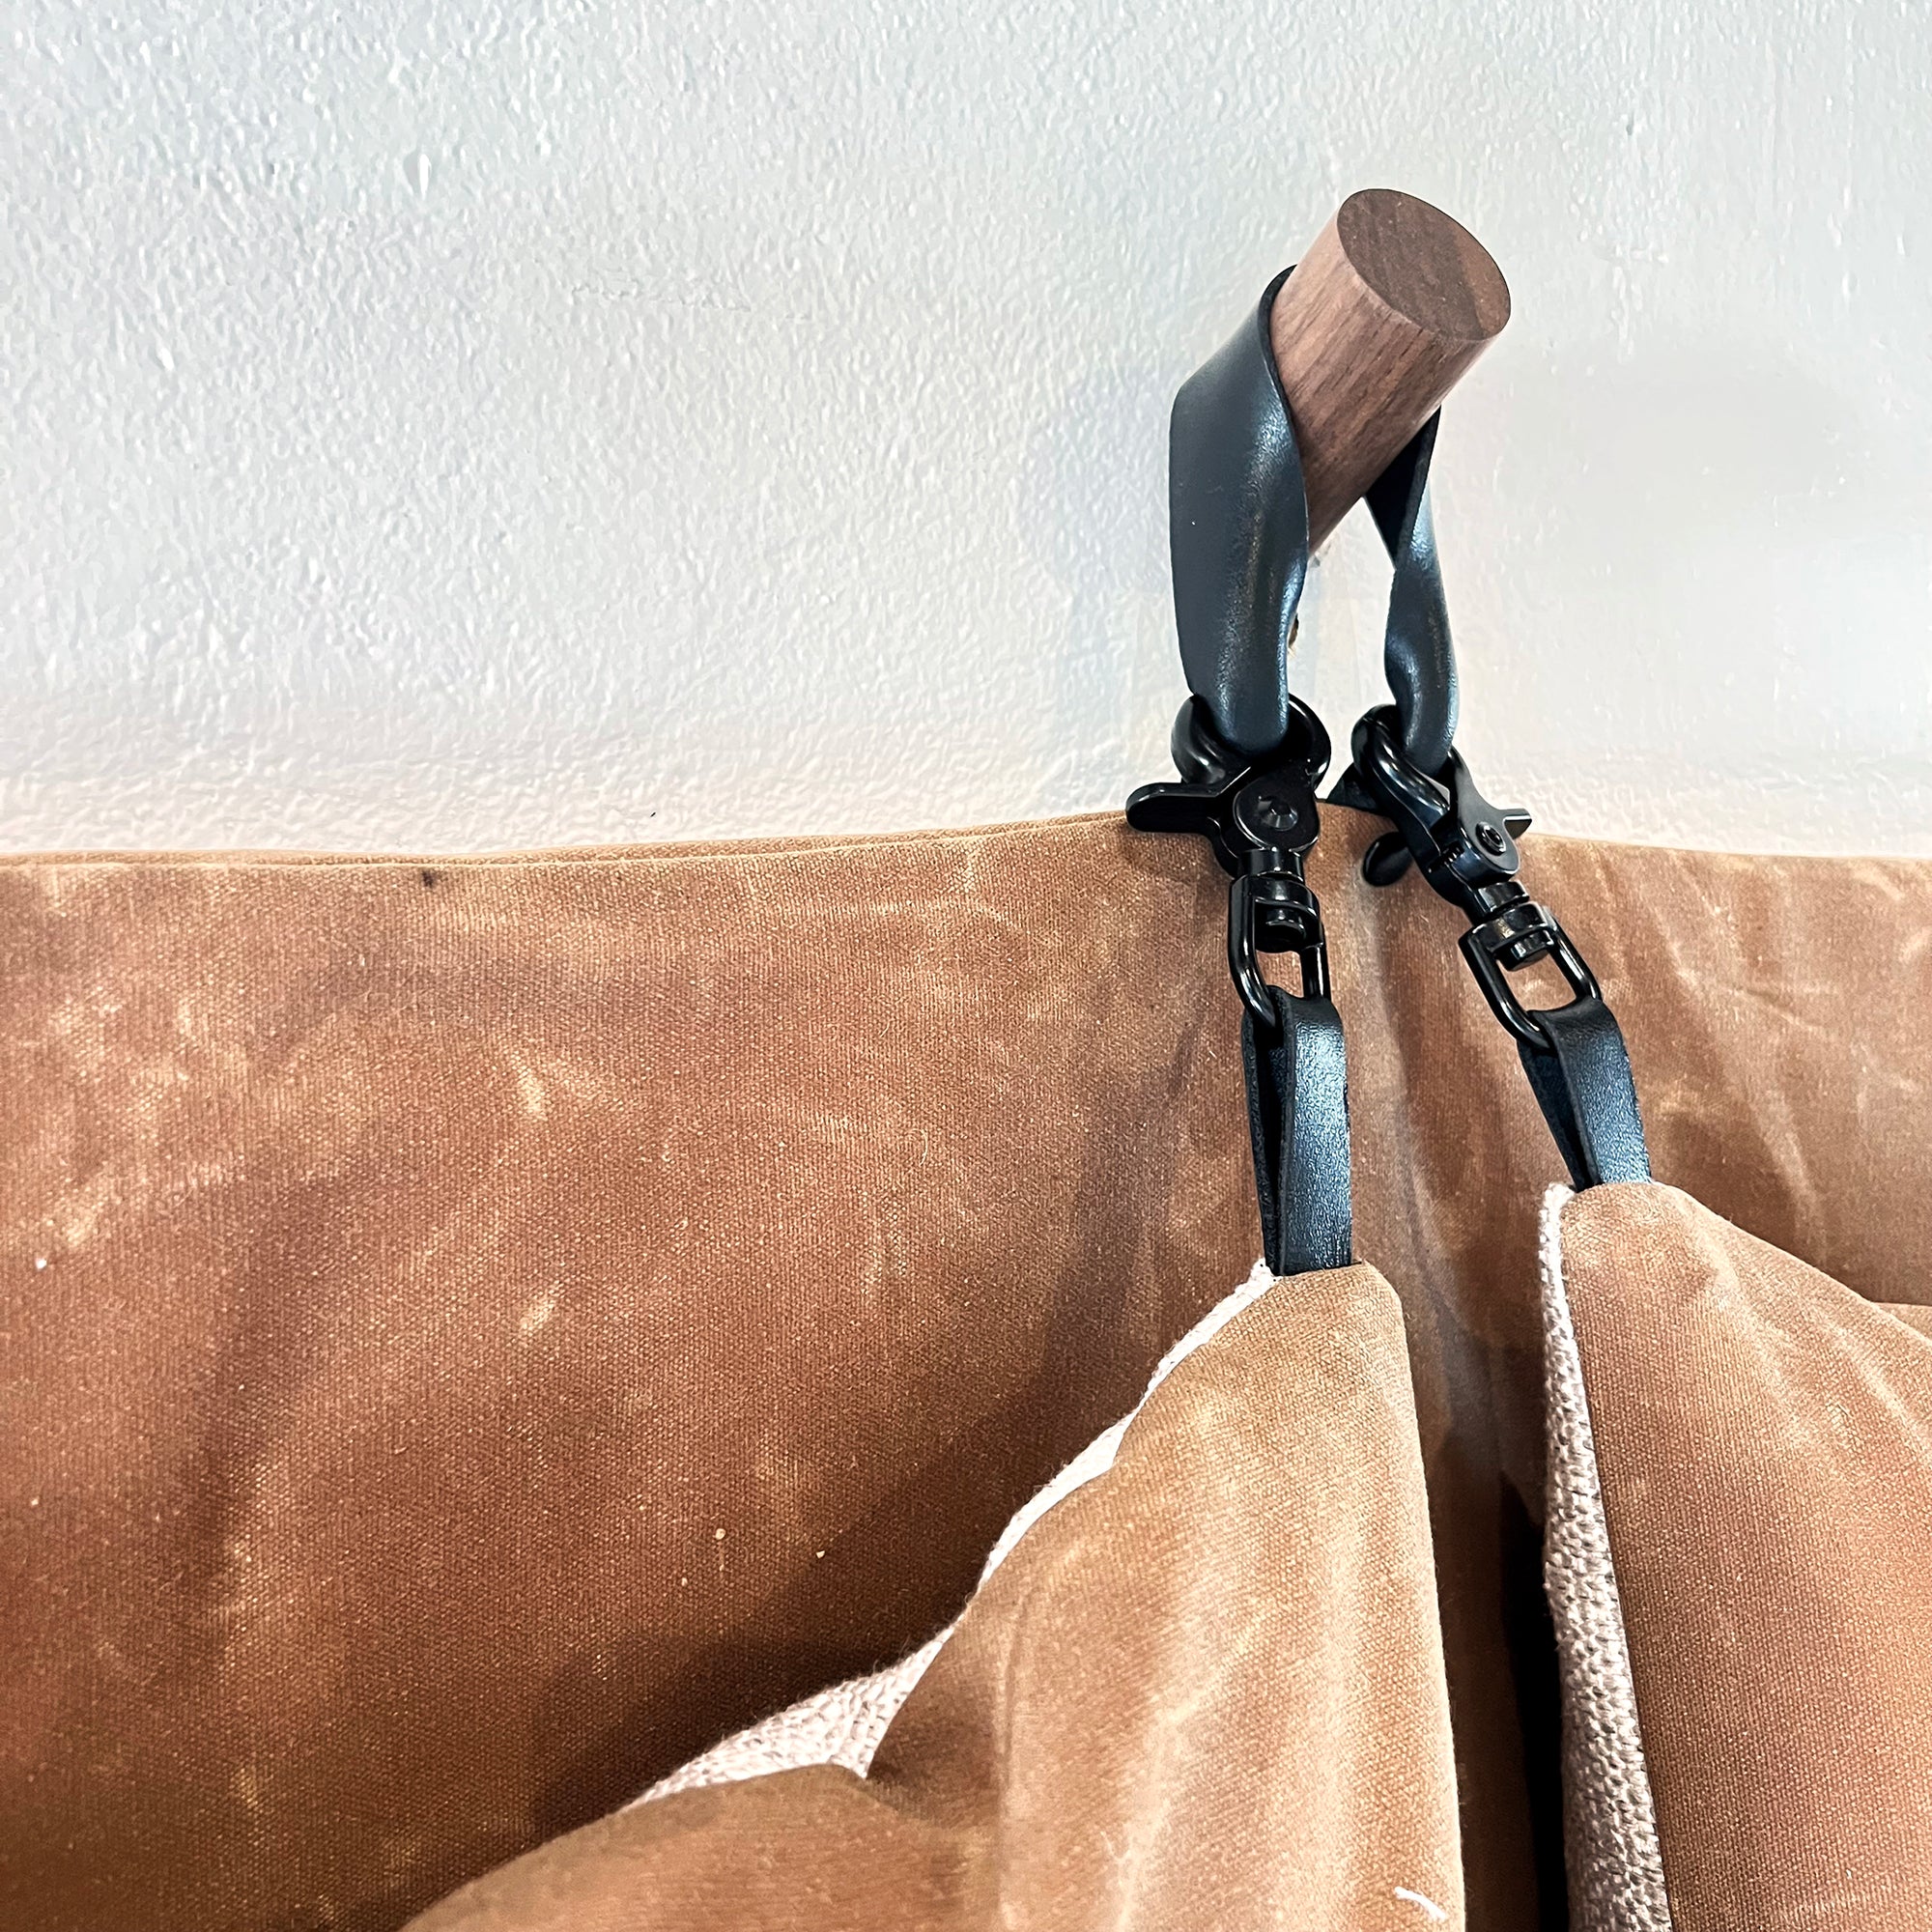 Black clasps attached to leather loops on the pillow corners show the rugged versatility of being able to change out the pillows with ease.